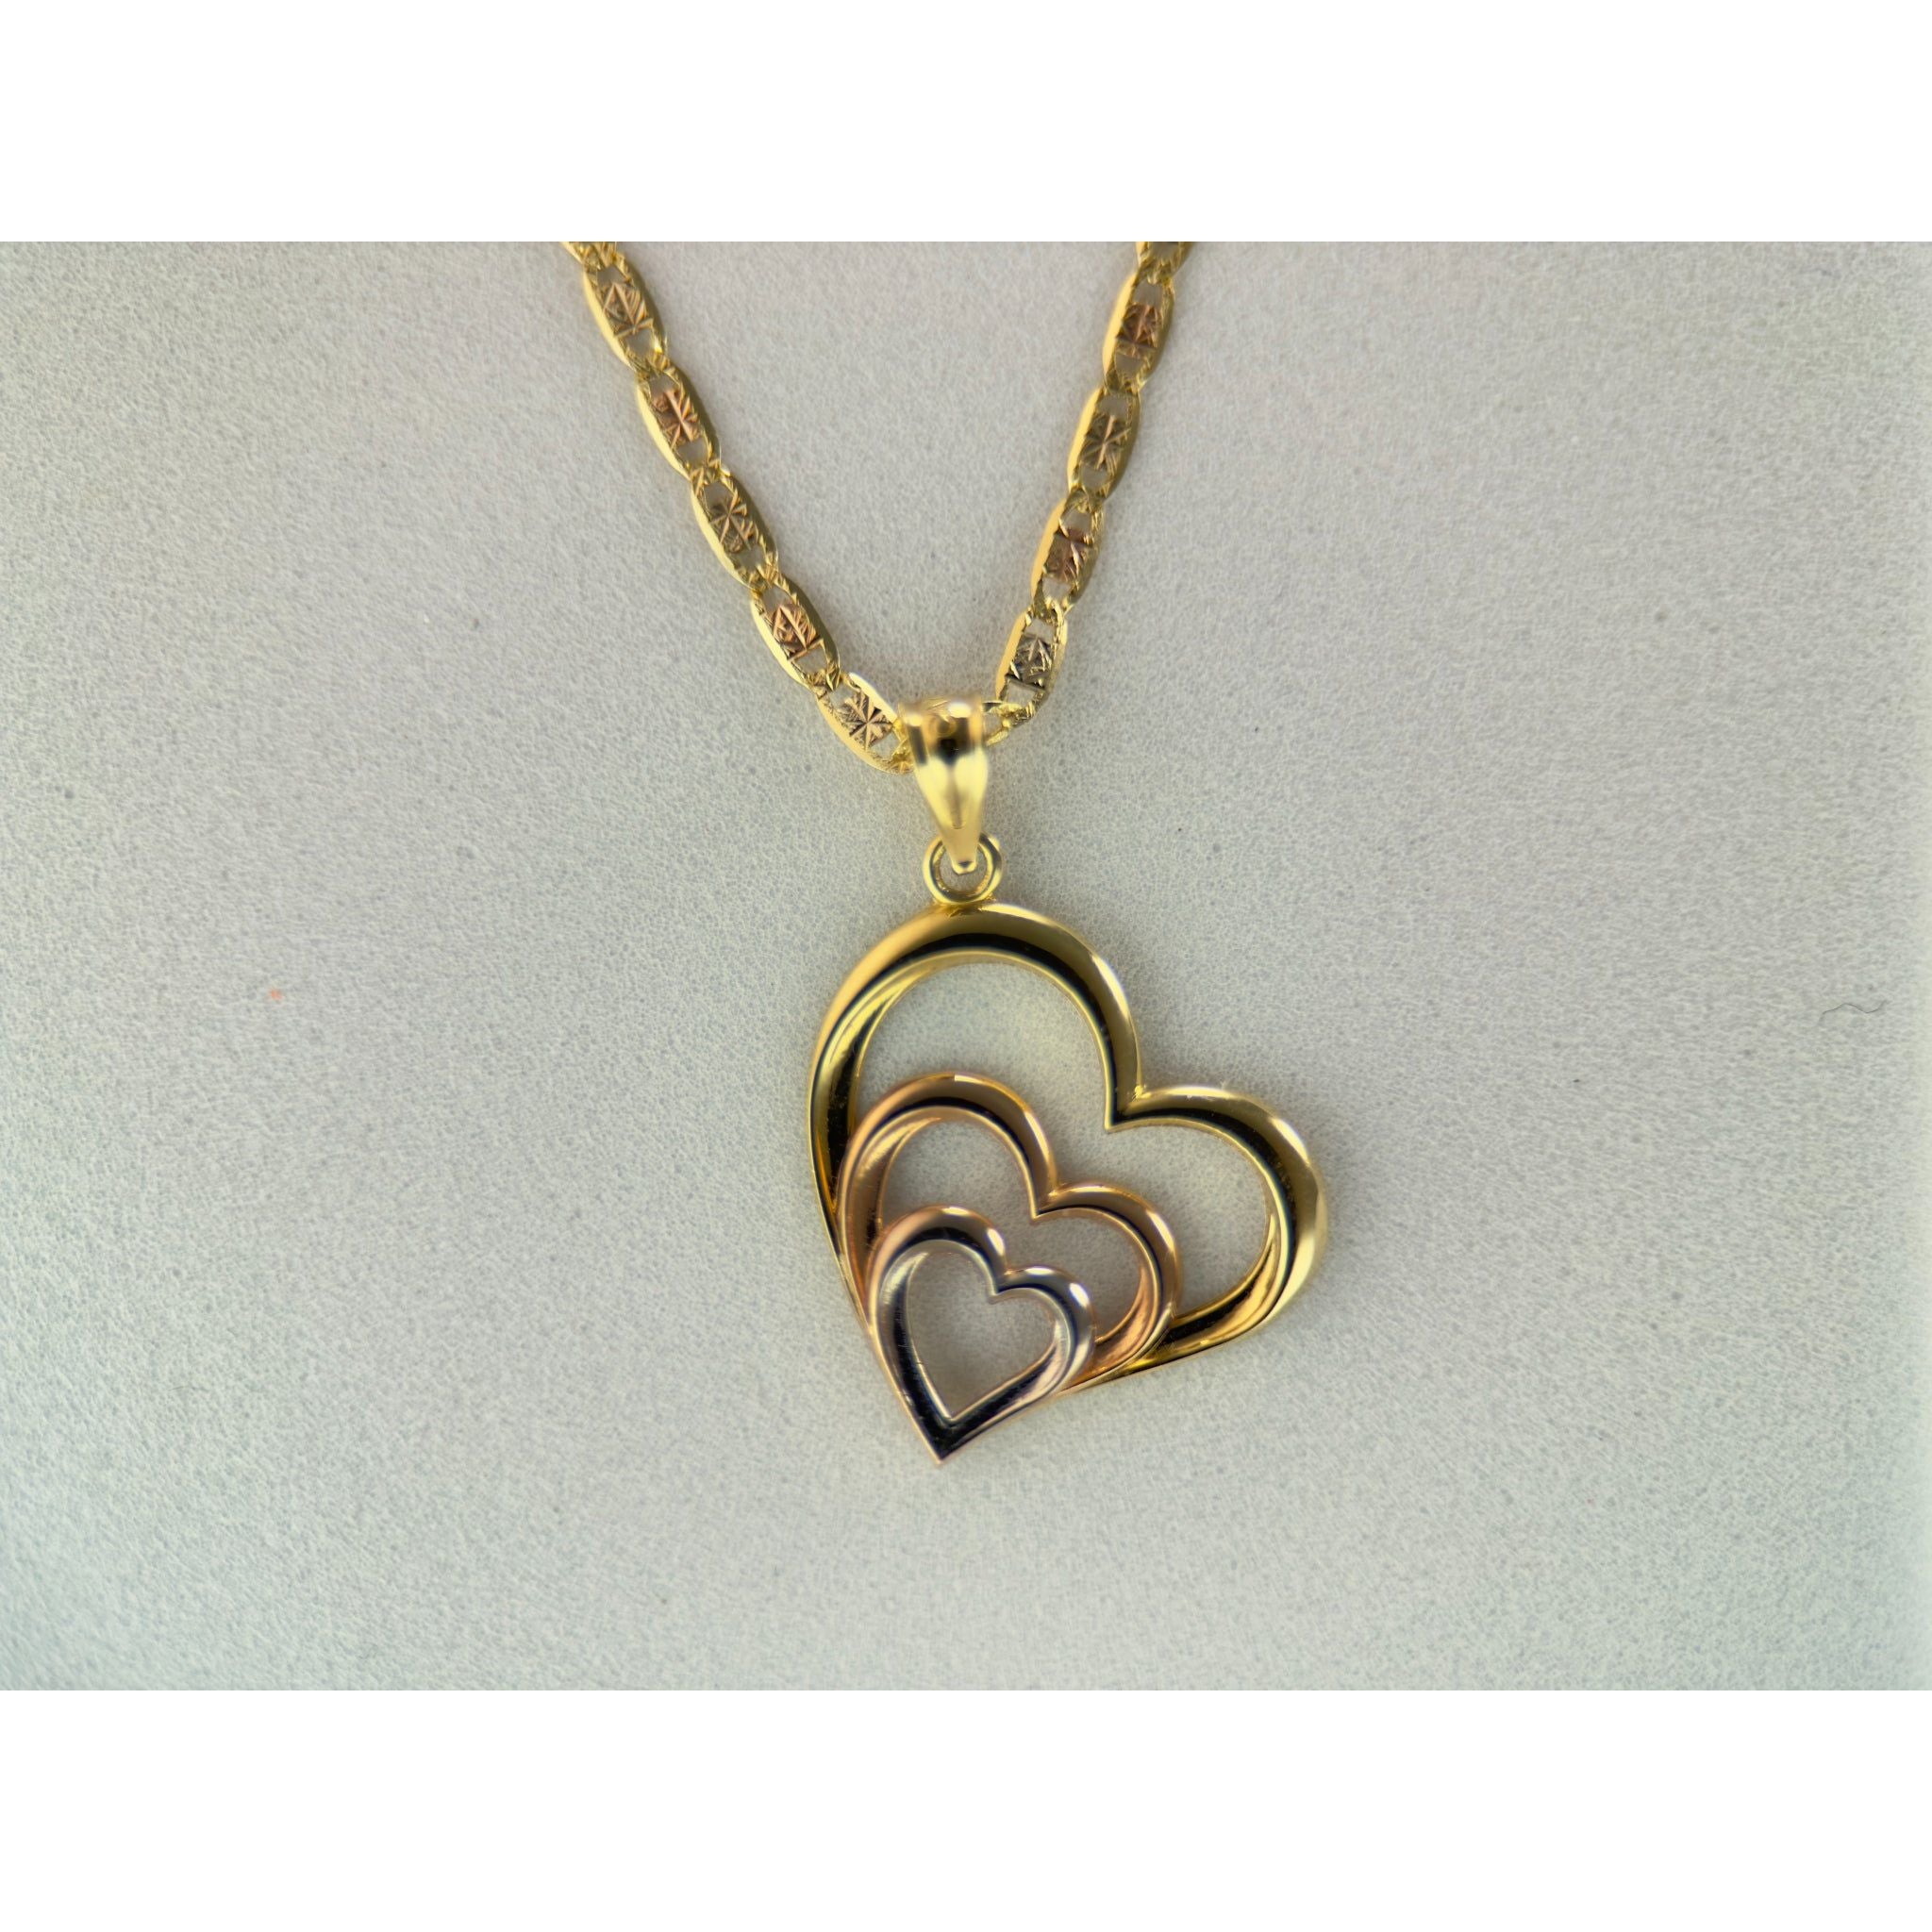 DR1918 - 14K Yellow Gold,14K Rose Gold,14K White Gold Gold Chain & Charm - 3 Hearts